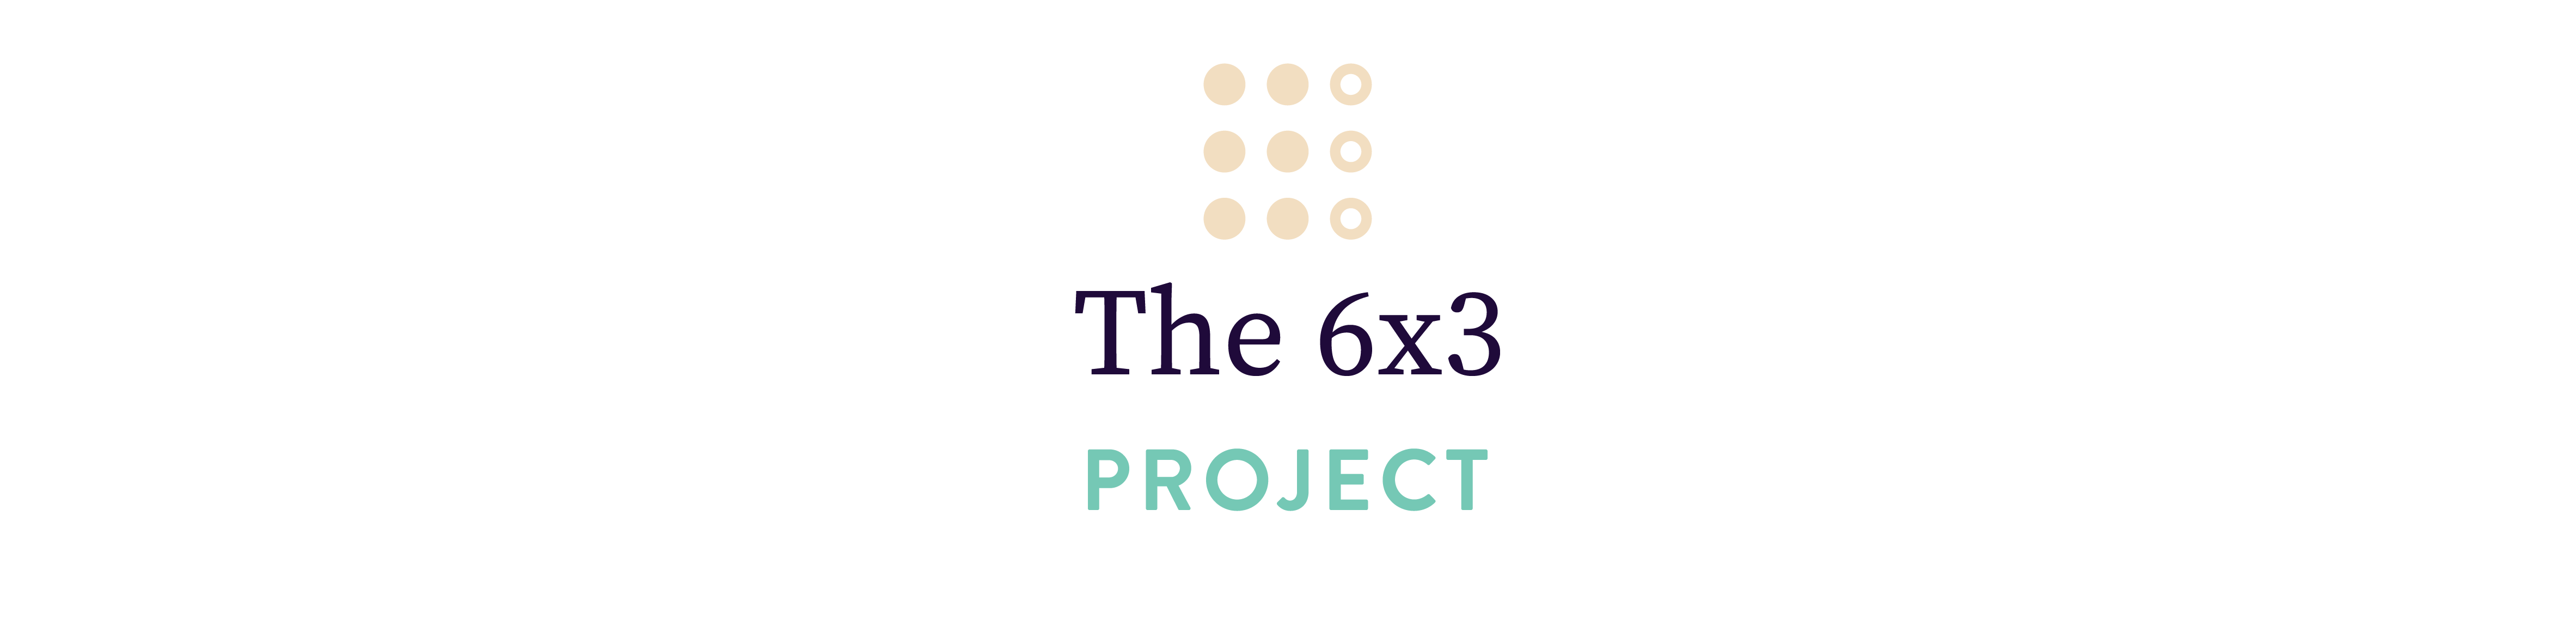 The 6x3 Project Logo